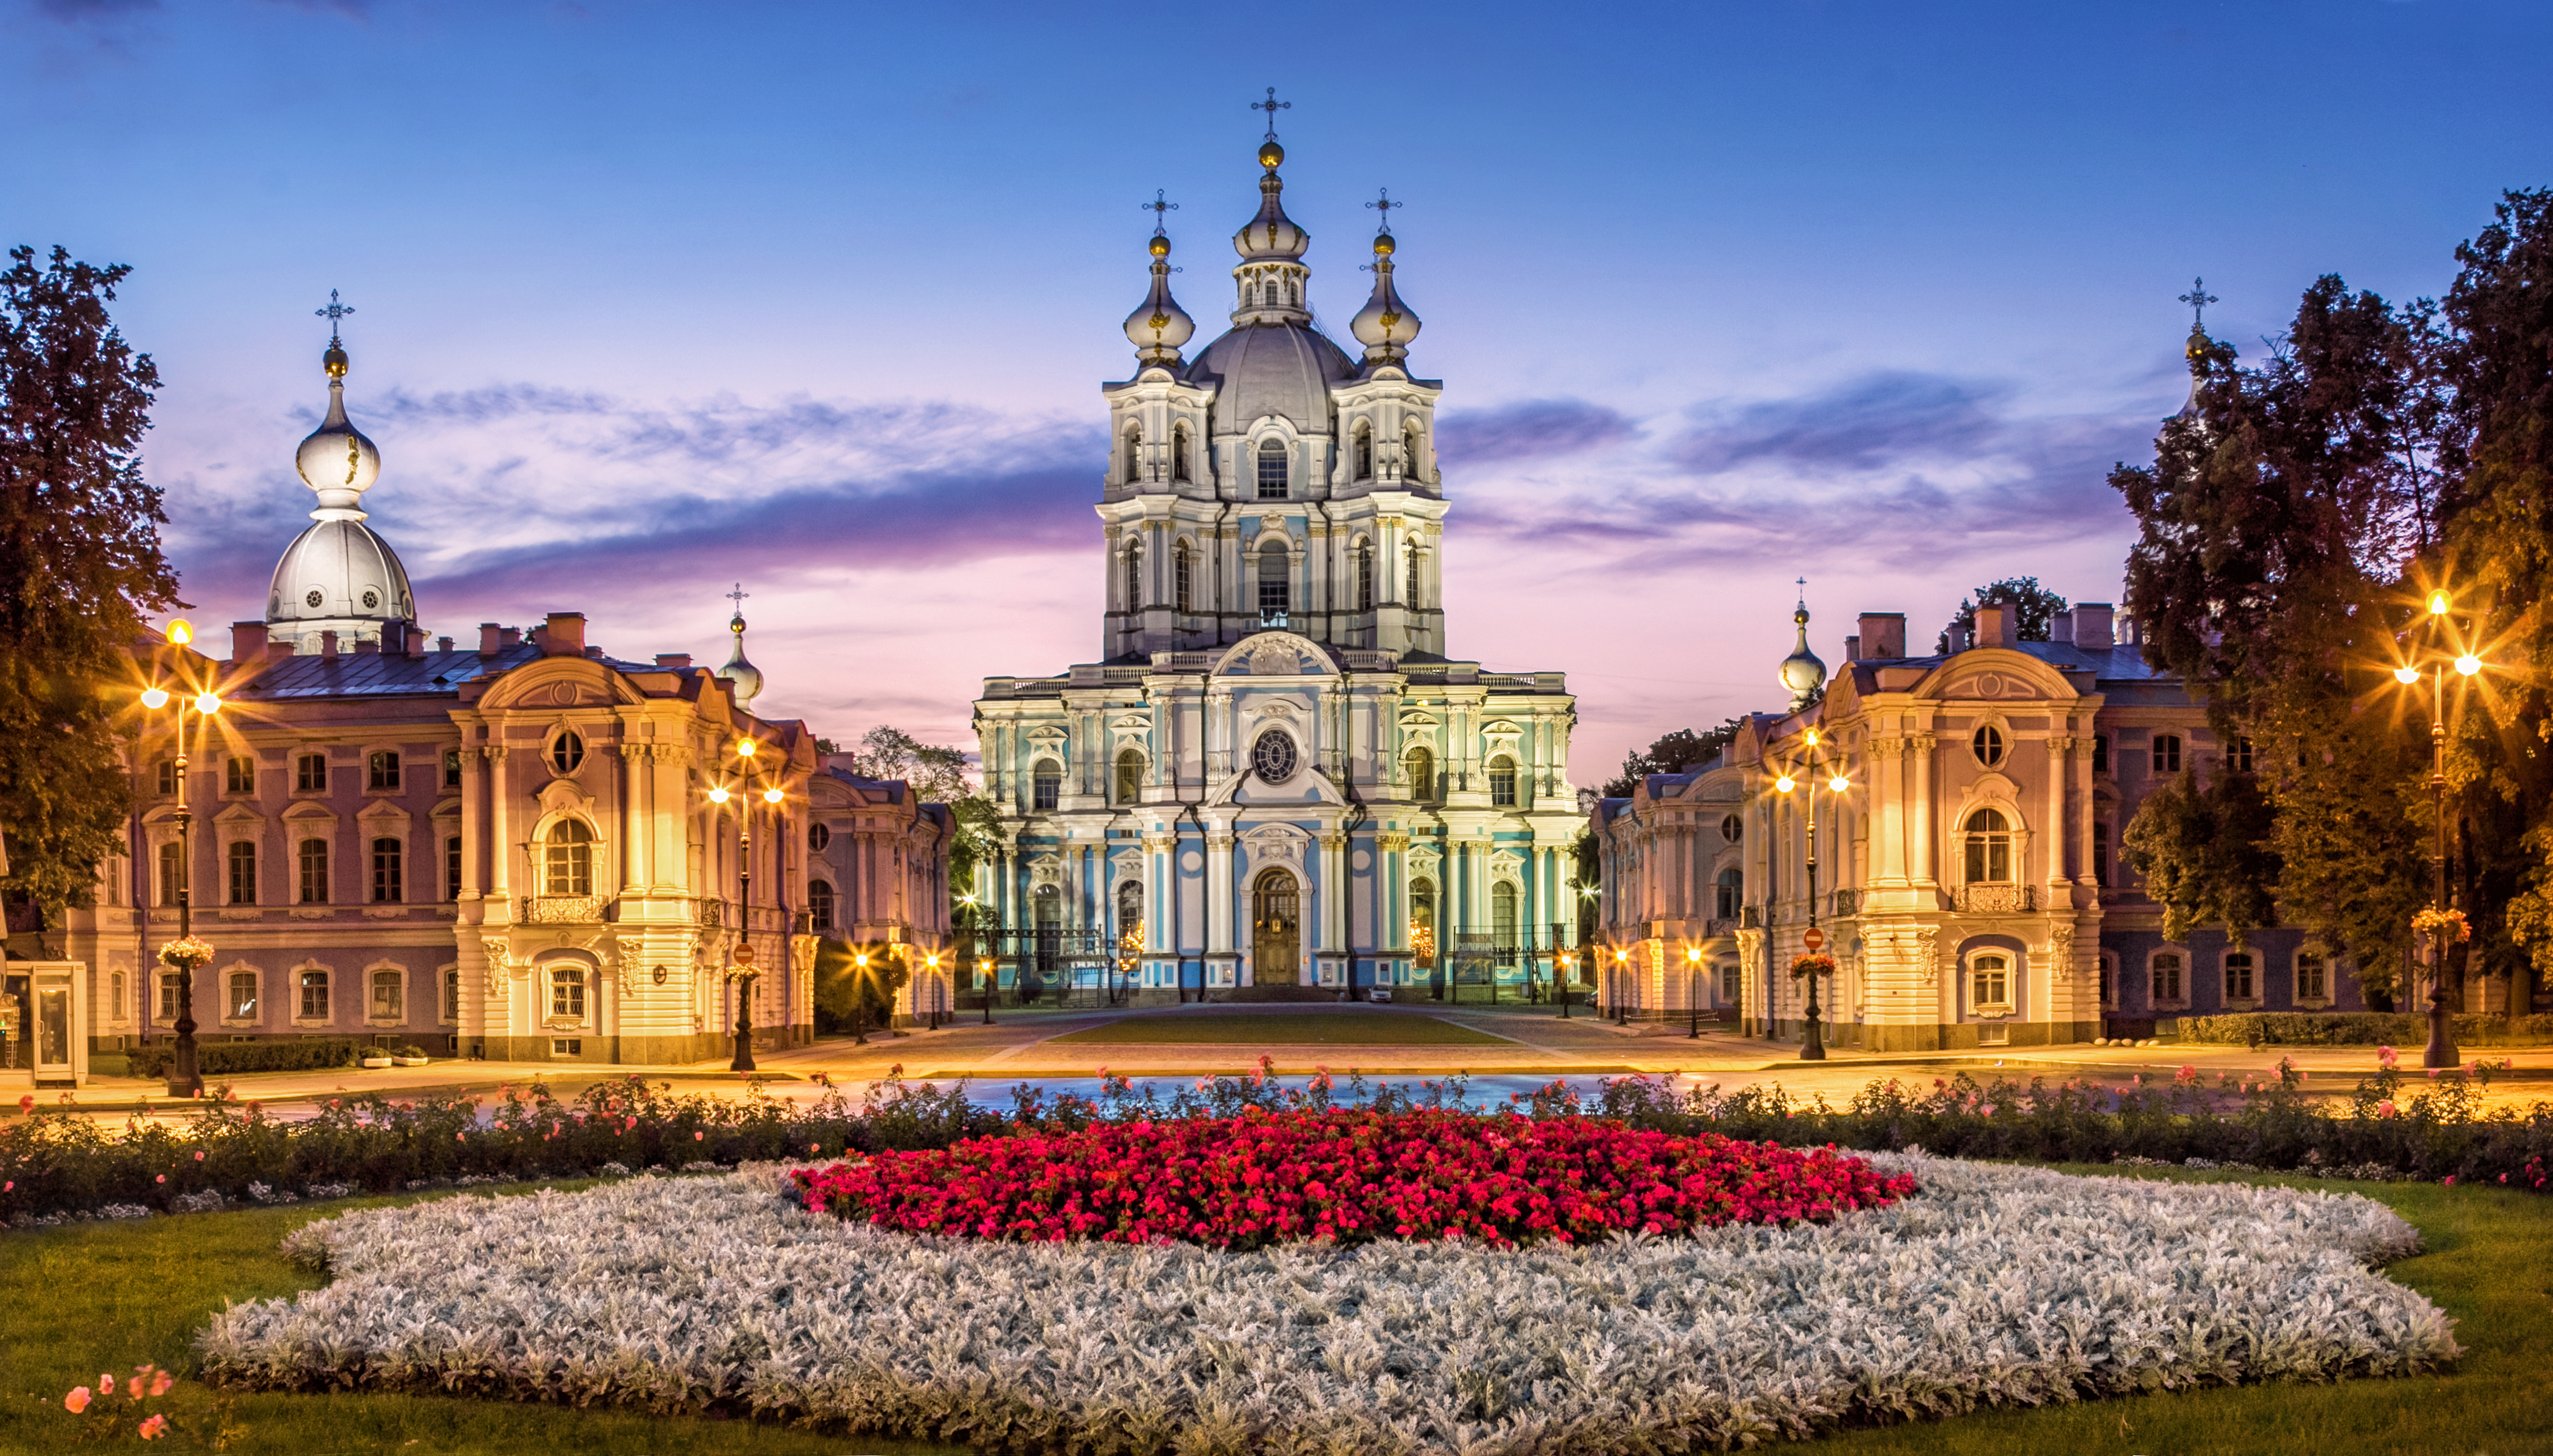 Smolny Cathedral | St Petersburg, Russia Attractions - Lonely Planet